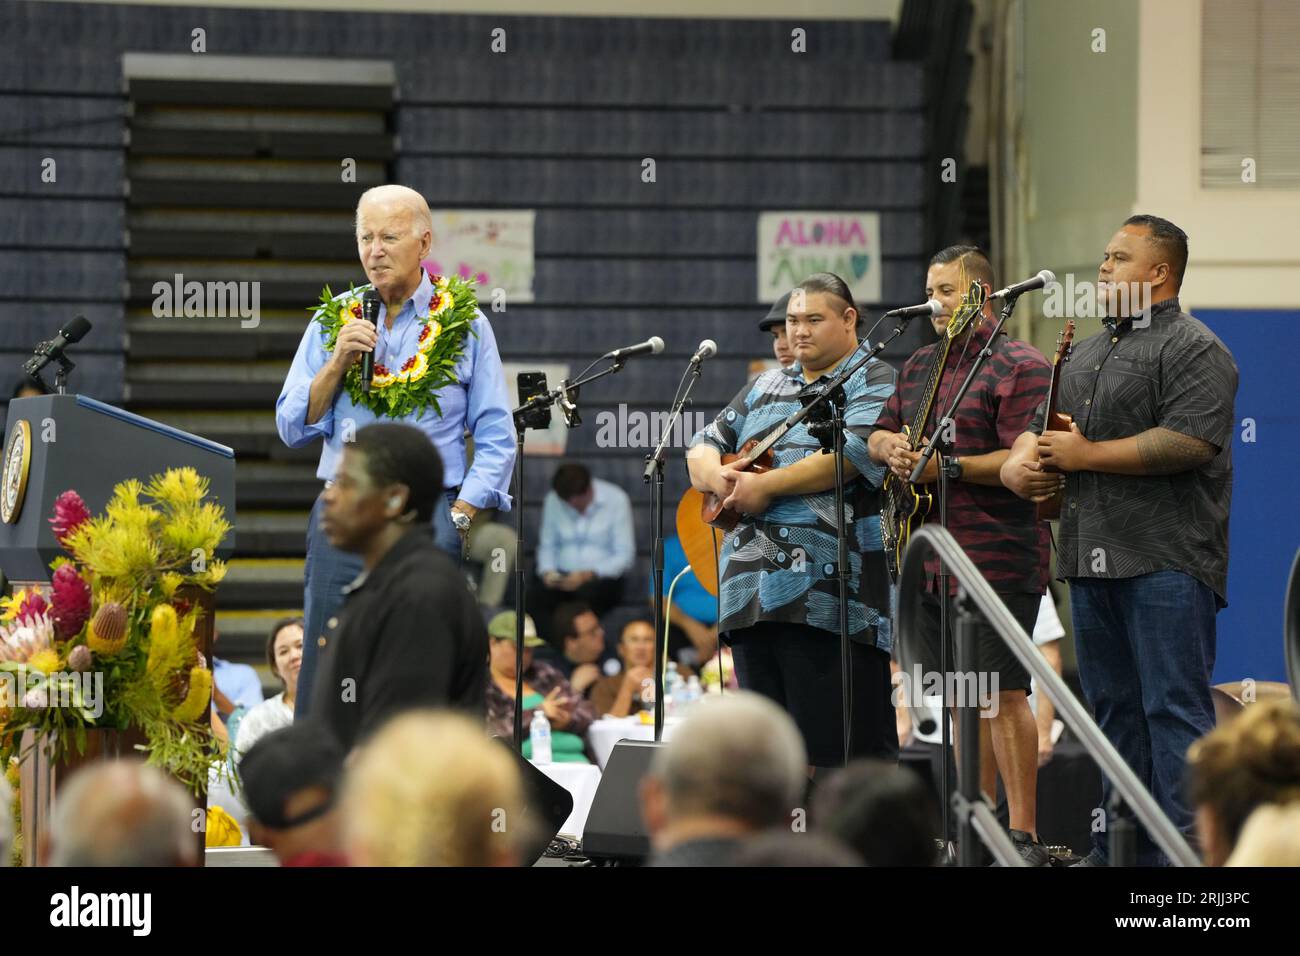 Maui, Hawaii (Aug. 21, 2023) - President Biden speaks at the civic center in Maui after the Hawaii Wildfires. Stock Photo